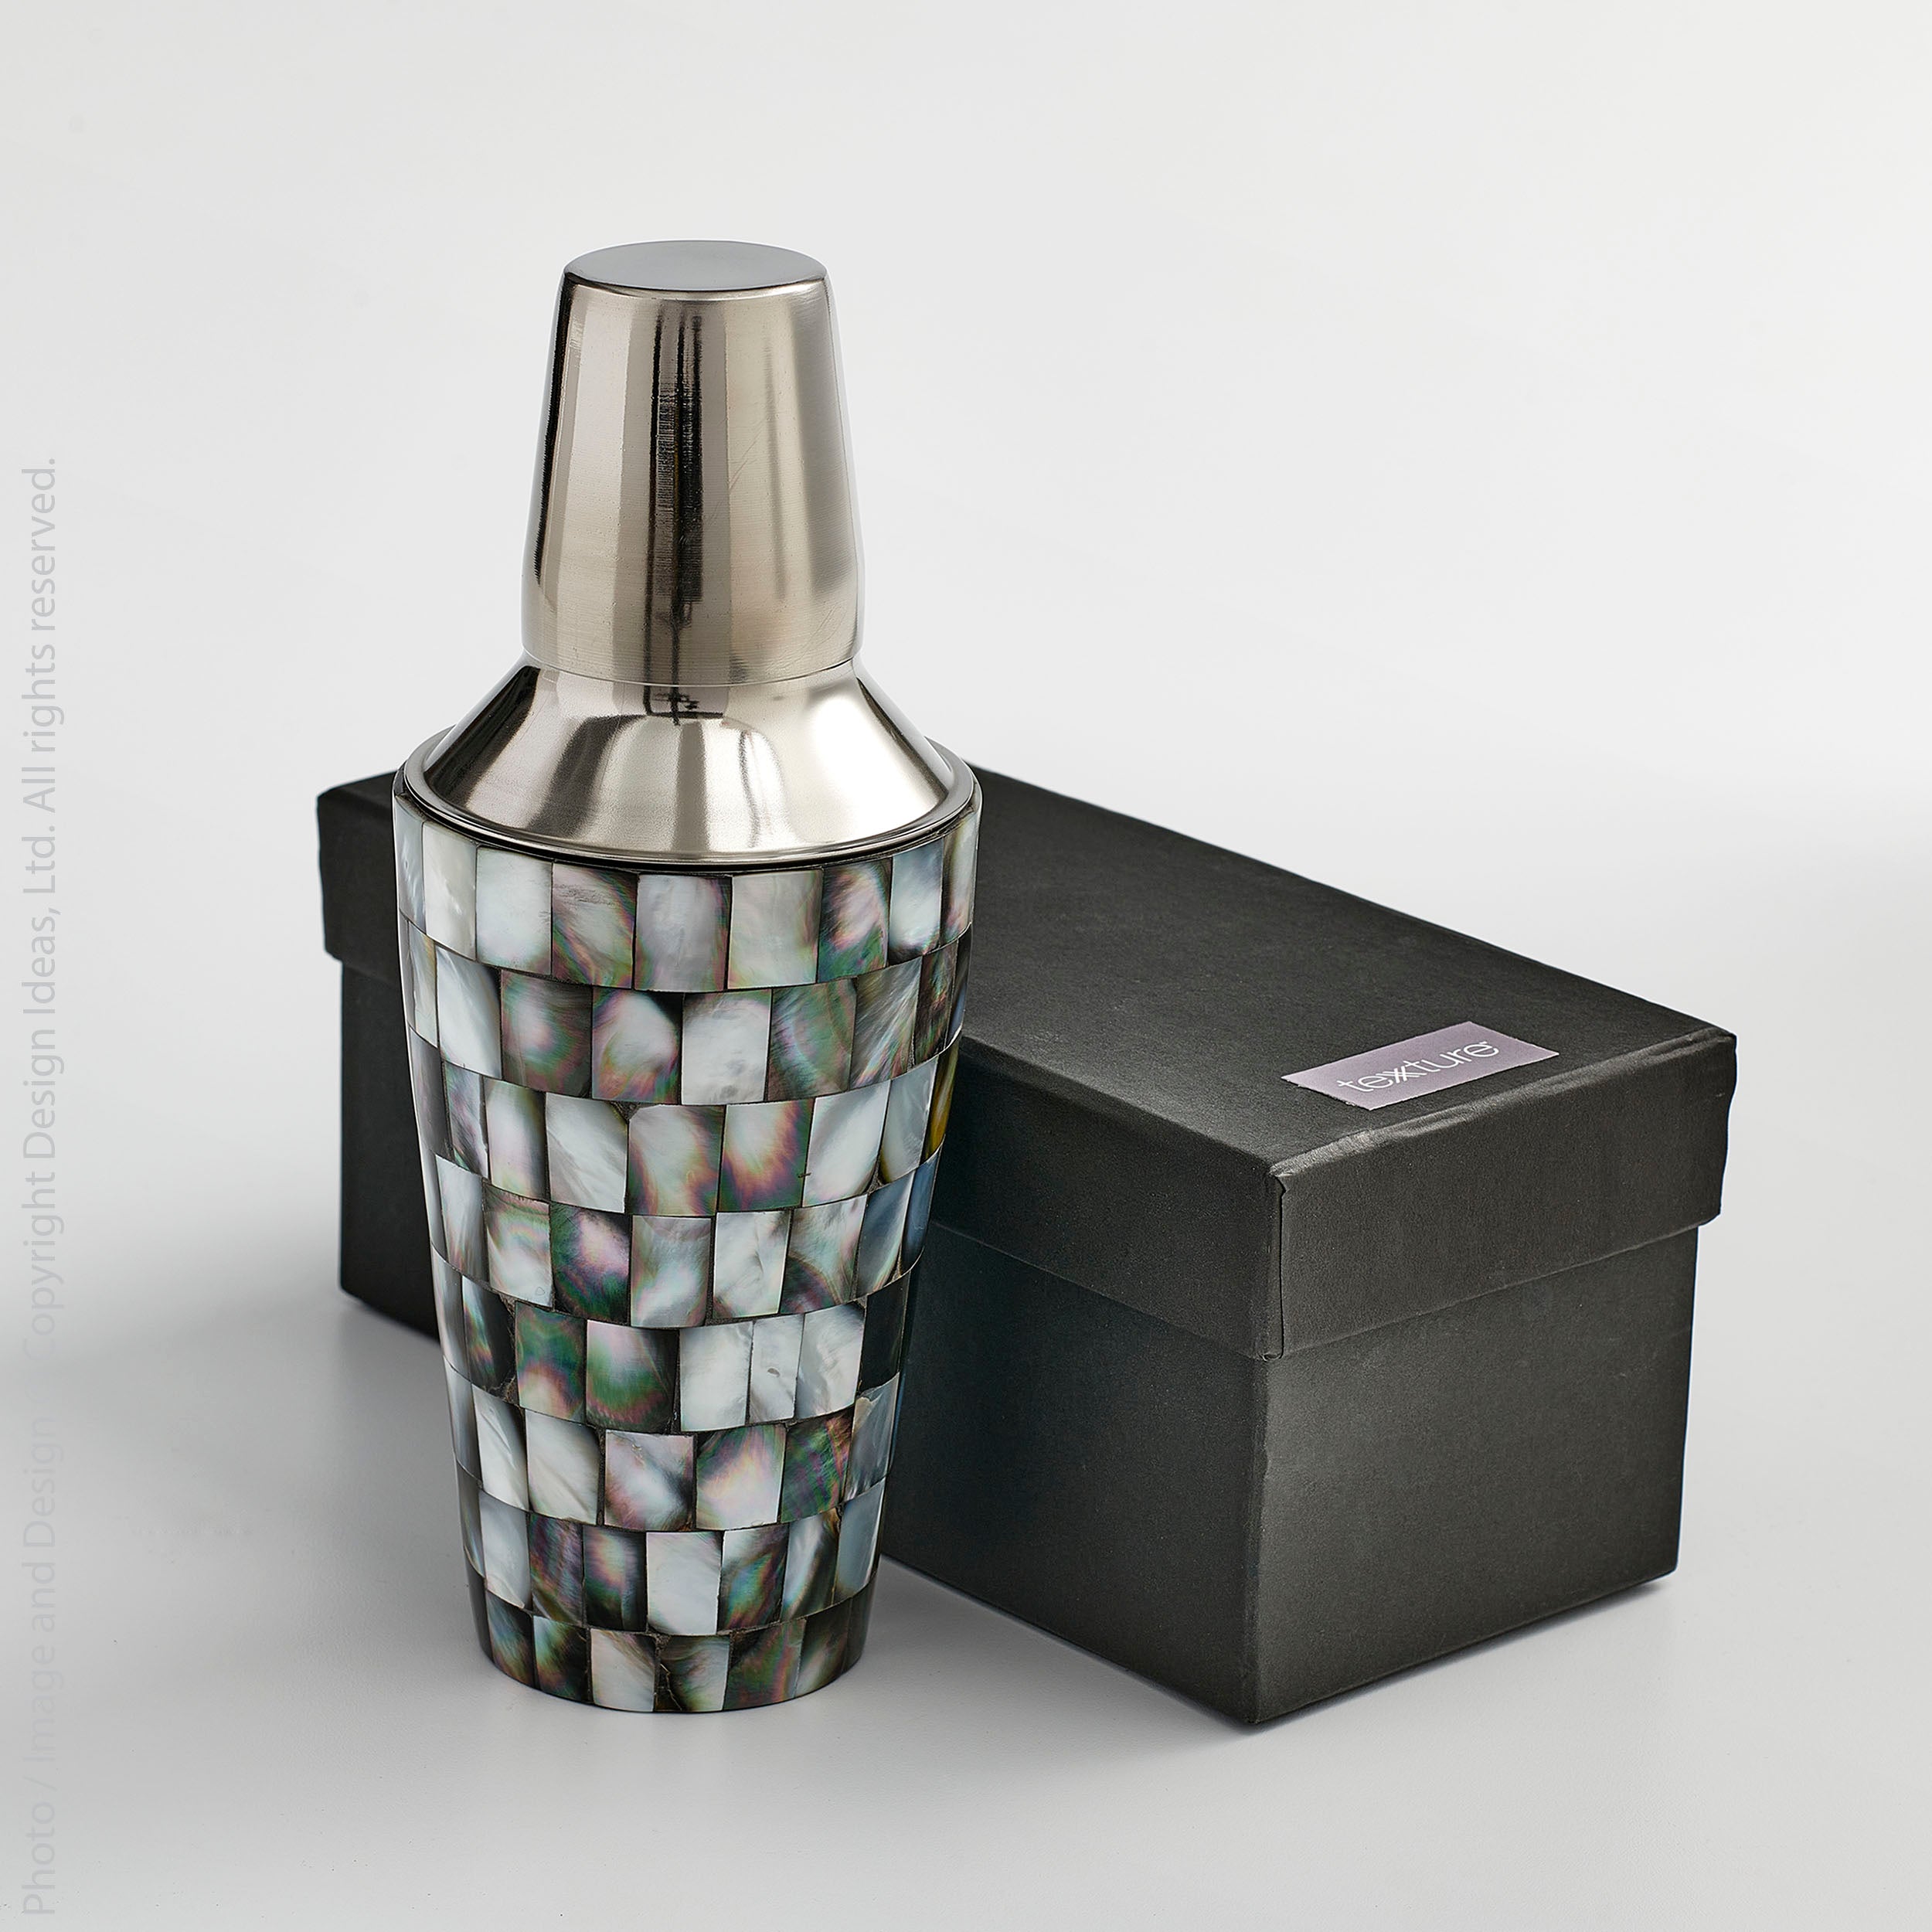 Abalon™ Handmade Stainless Steel and Mother of Pearl Cocktail Shaker